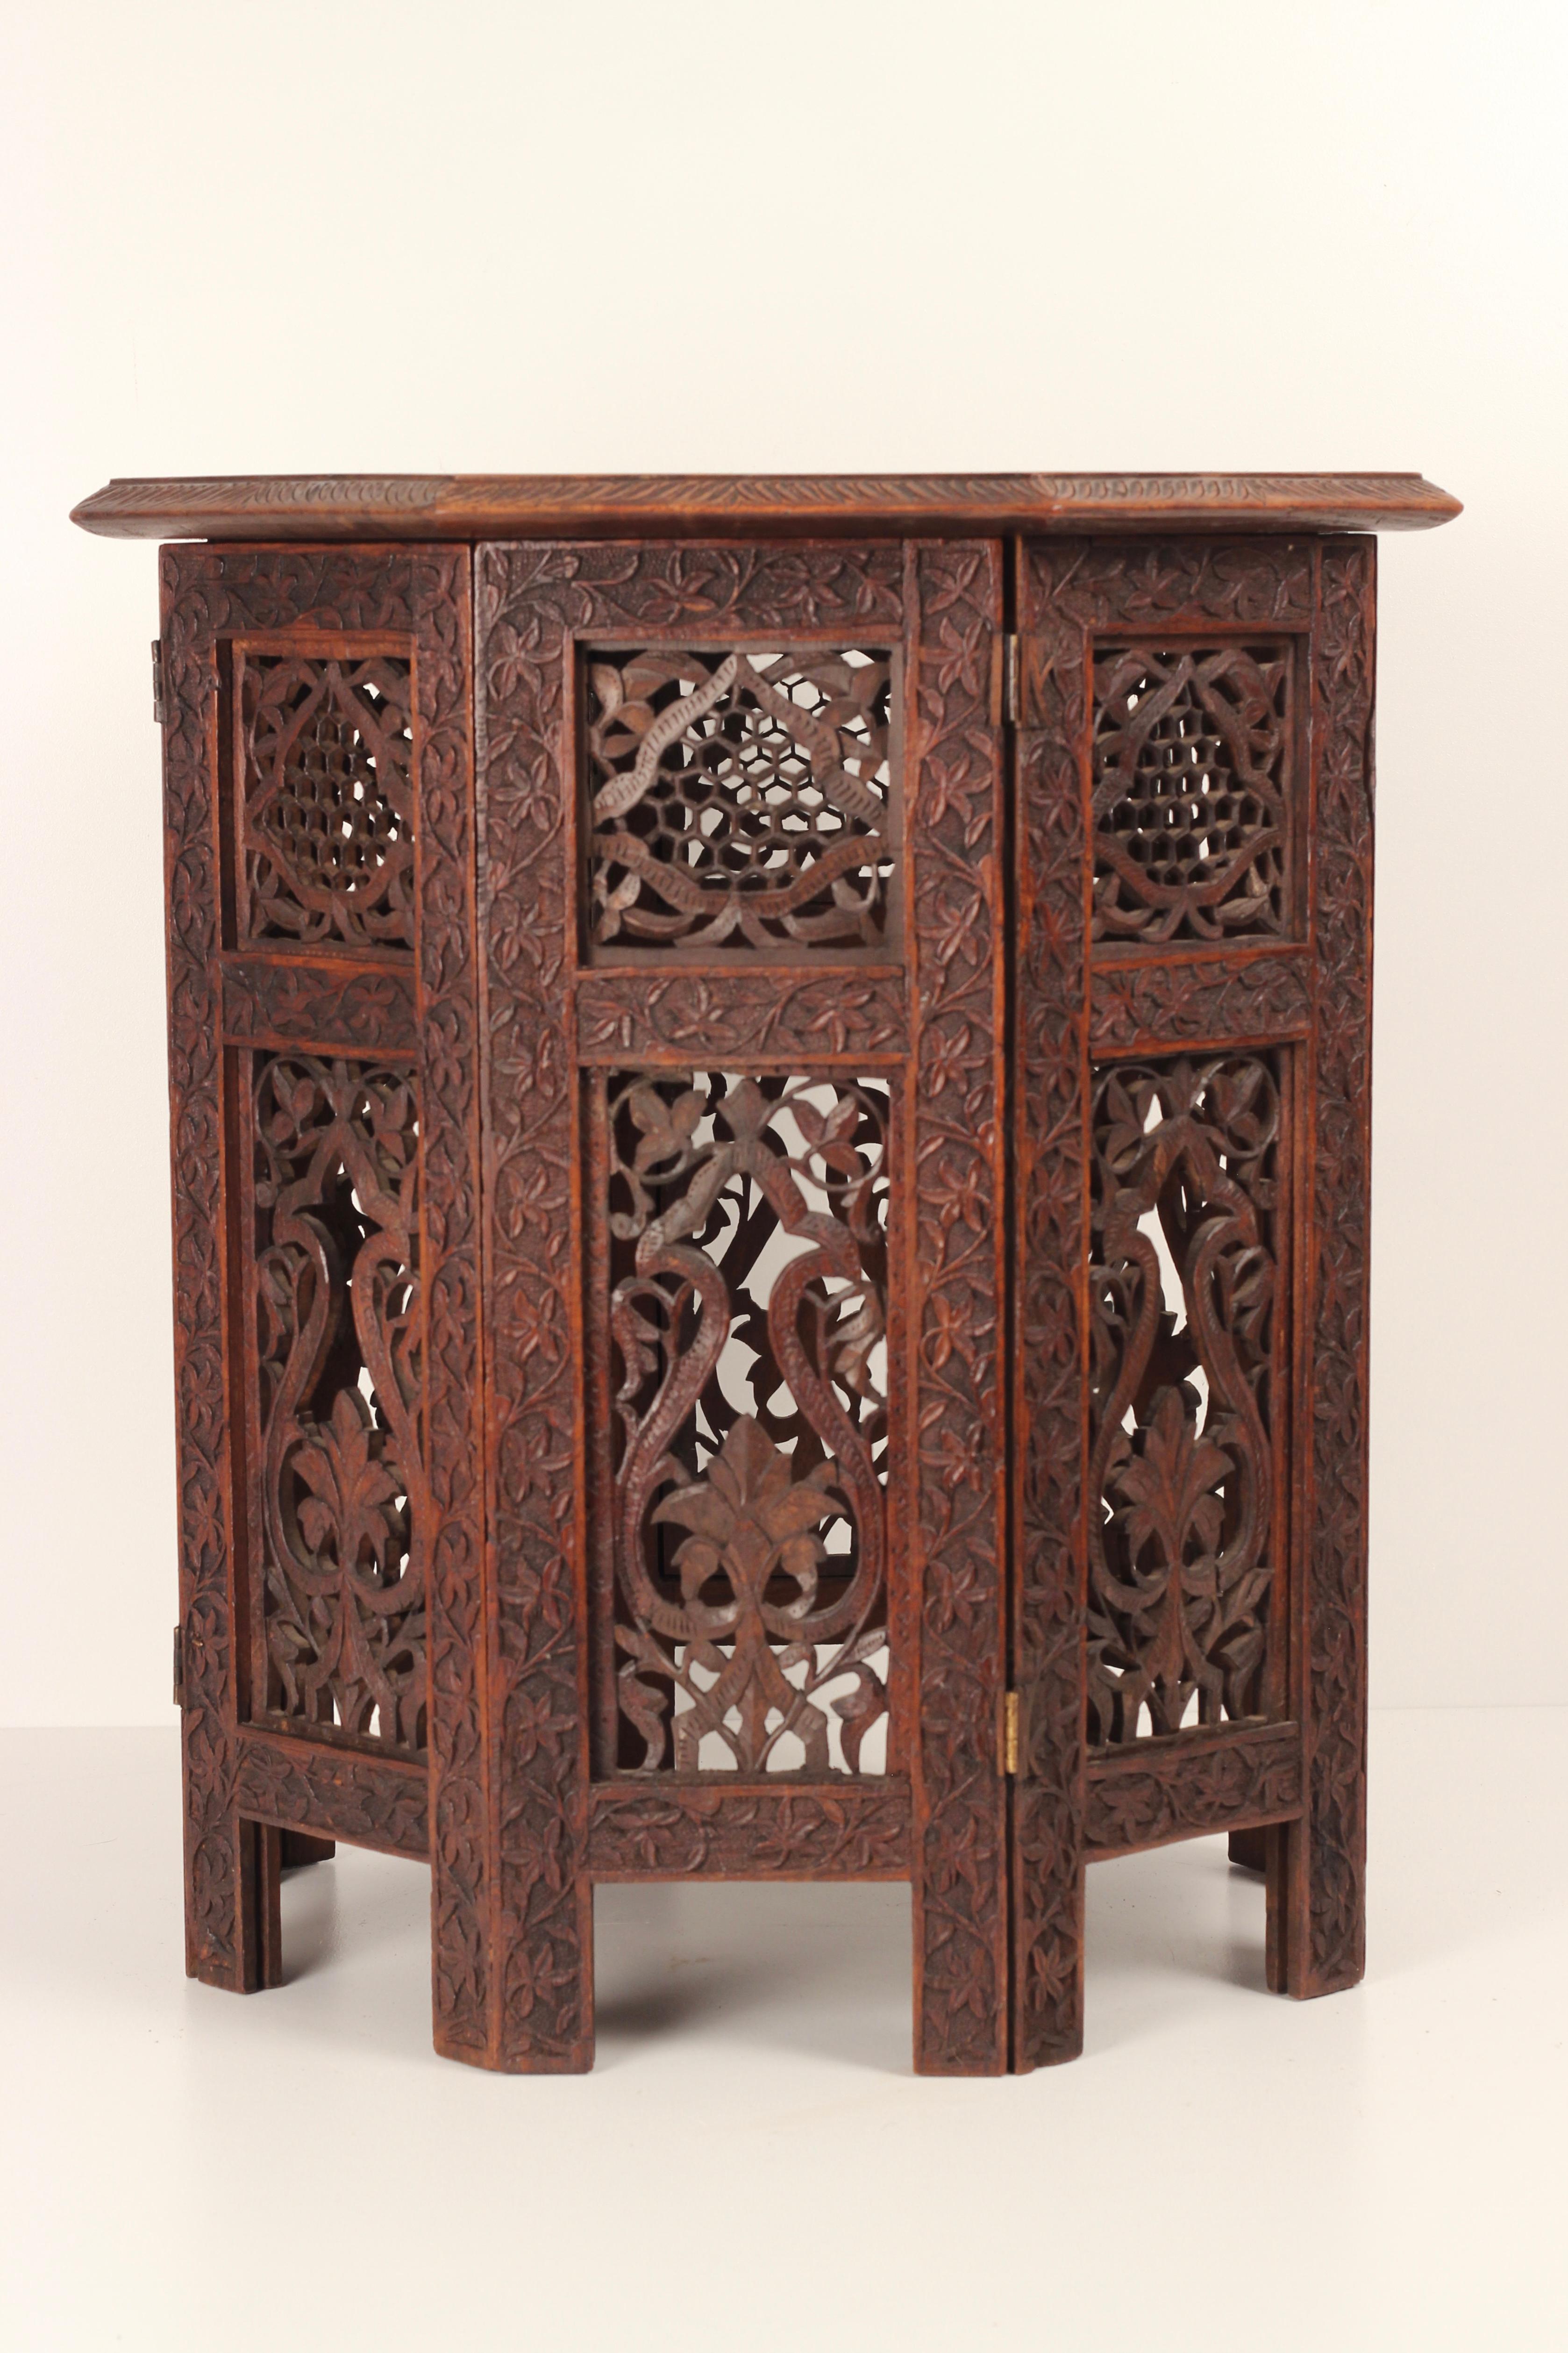 Boho Chic style 19th Century Hand Carved Wooden Moorish Octagonal Table For Sale 1